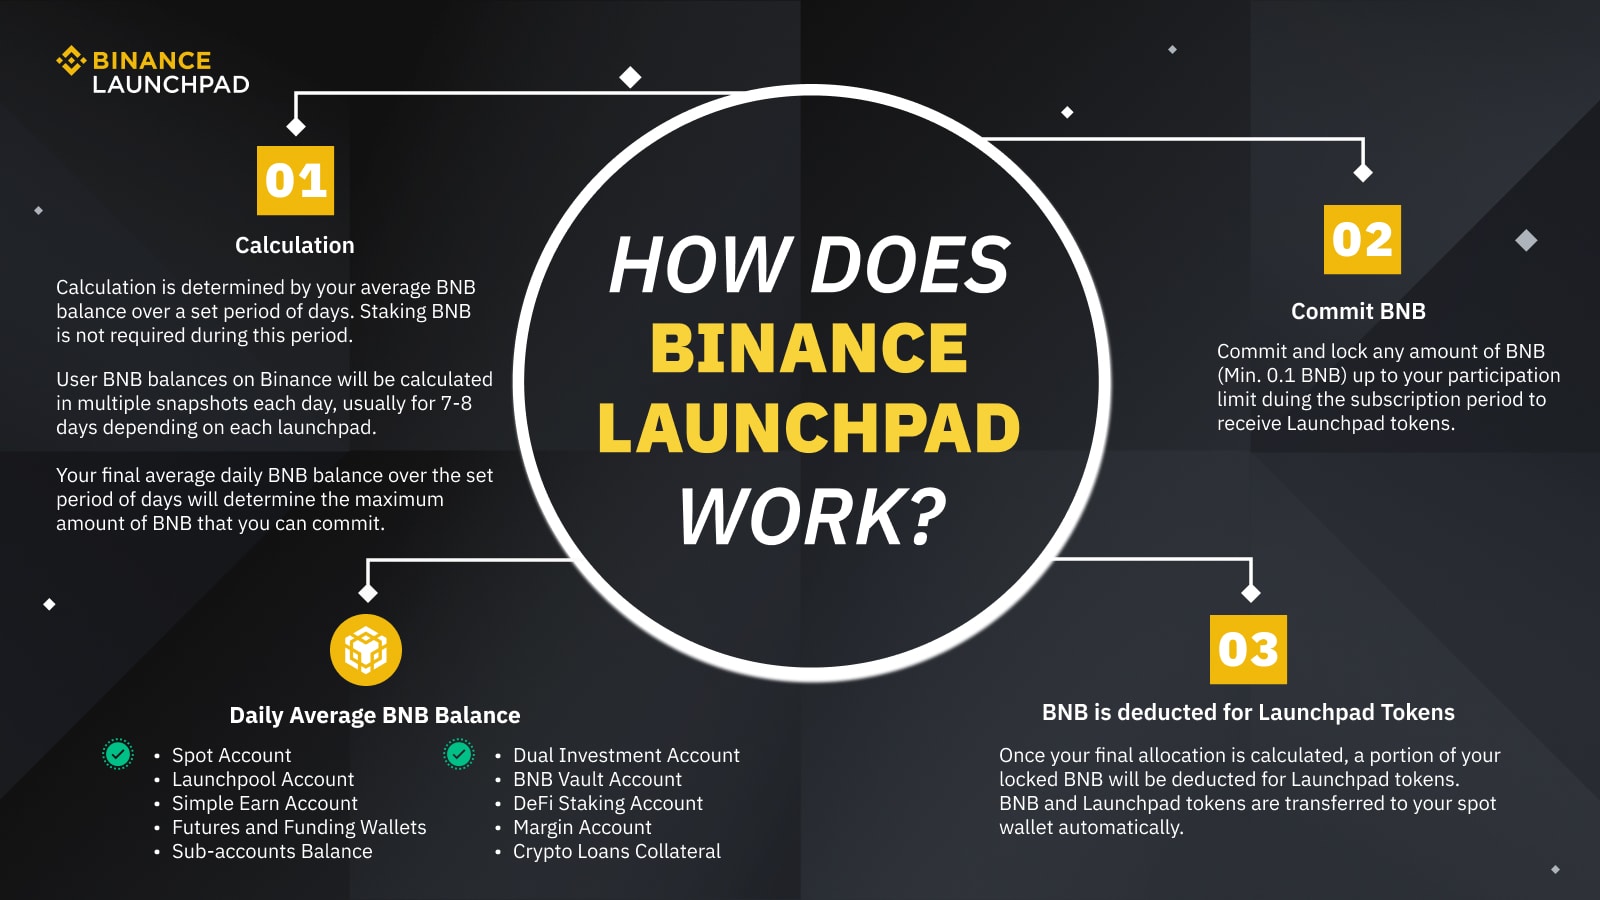 A comprehensive overview of how the Binance Launchpad works.